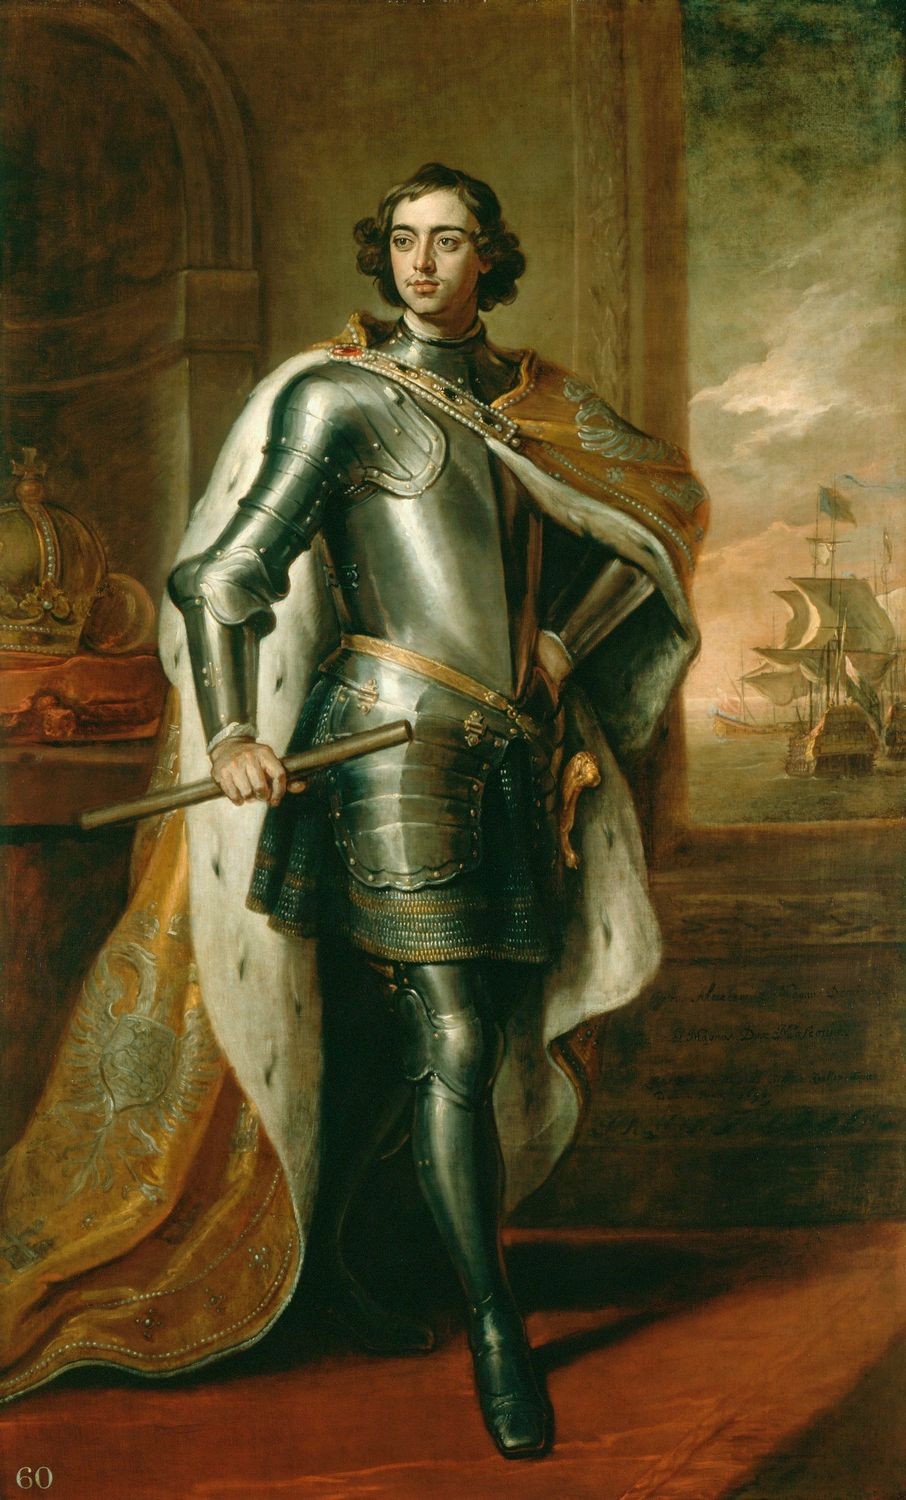 Peter the Great as a young ruler in 1698